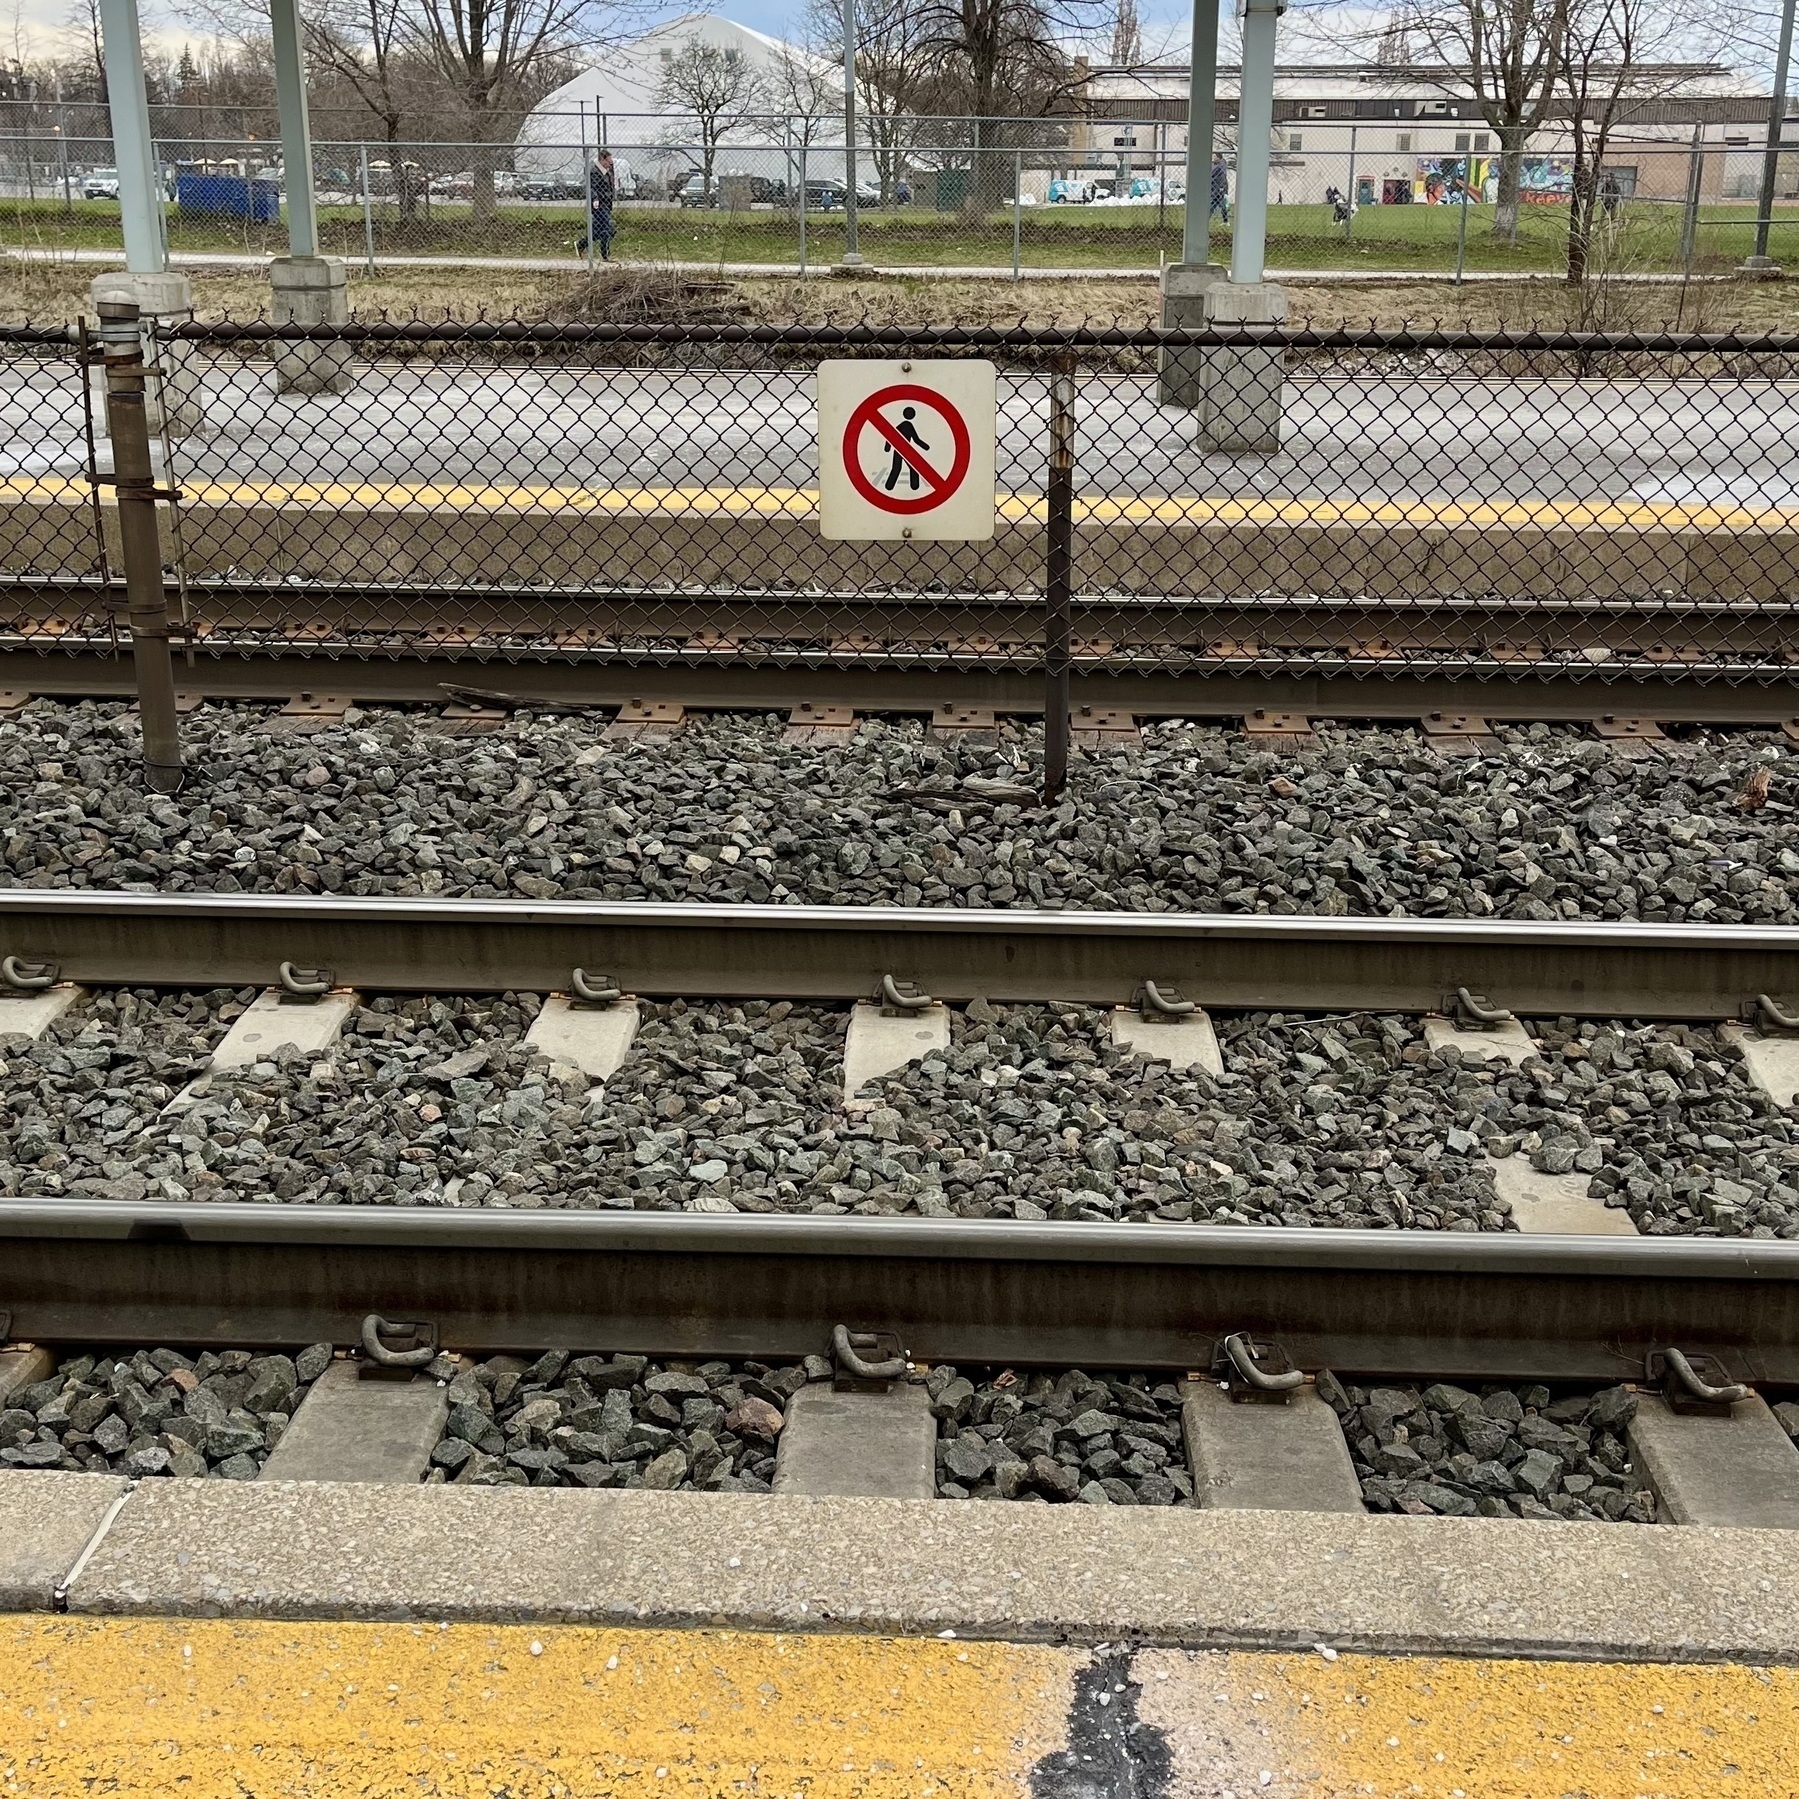 Railway tracks with a no entry sign, in front of a chain-link fence, next to a platform edge with a yellow line.